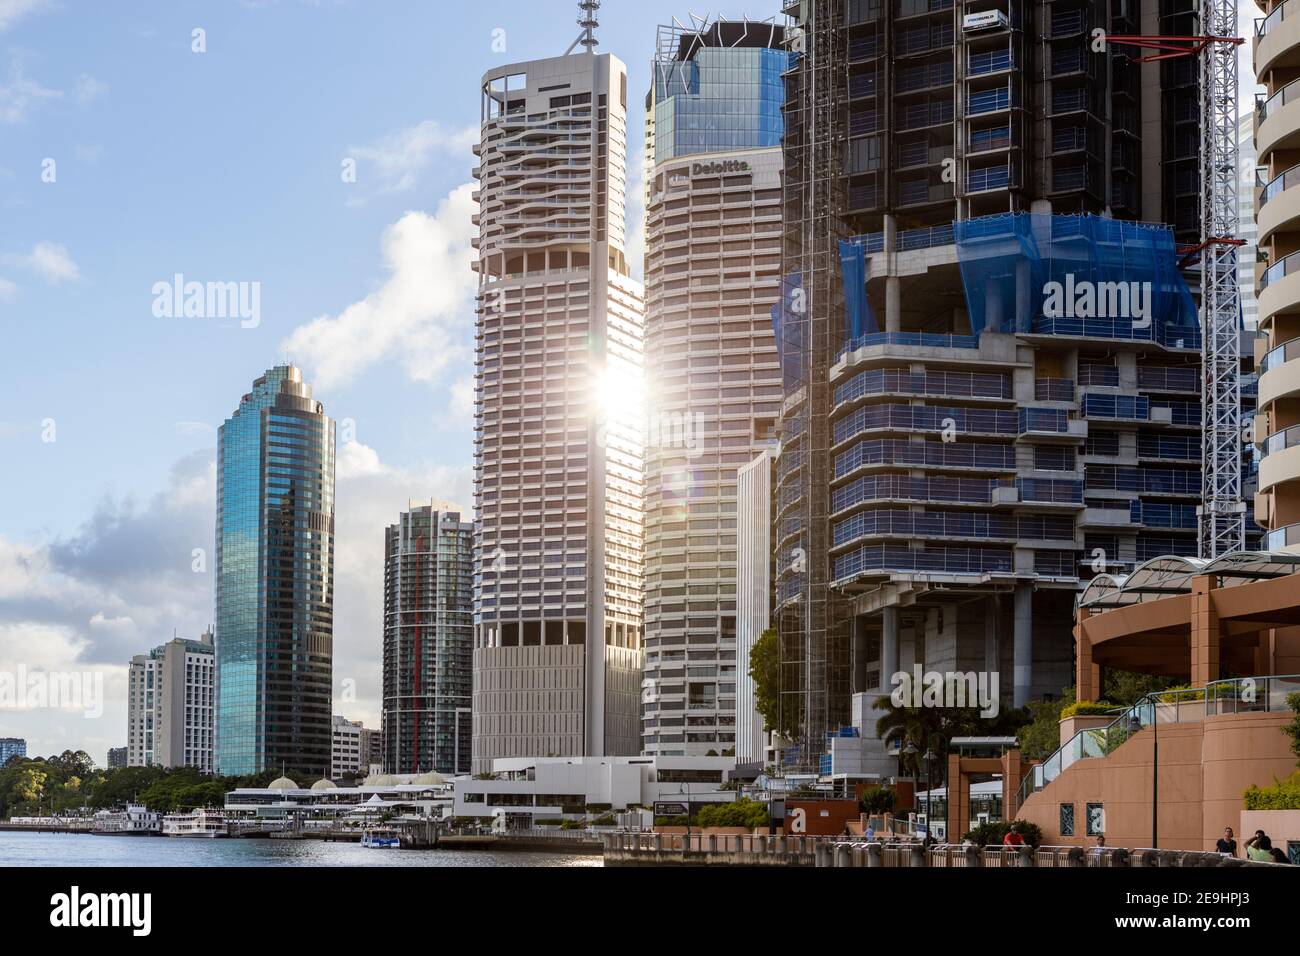 The iconic Brisbane Cityscape along the Brisbane River with the sun reflecting of the buildings in Queensland on January 31st 2021 Stock Photo